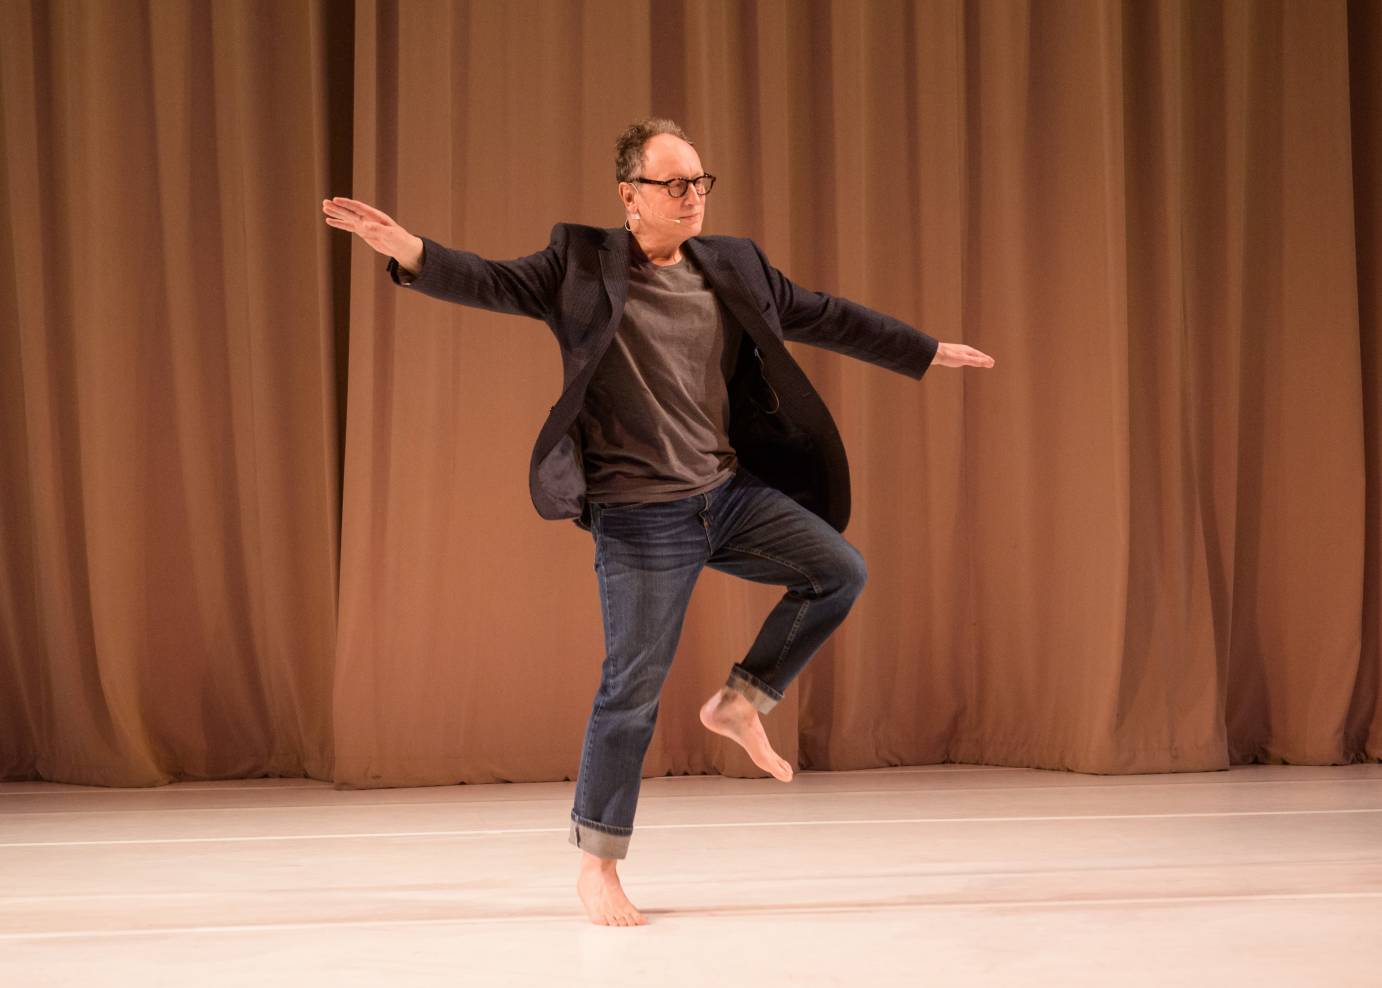 In barefeet and a sports coat, Paul Lazar lifts a leg and extends his arms